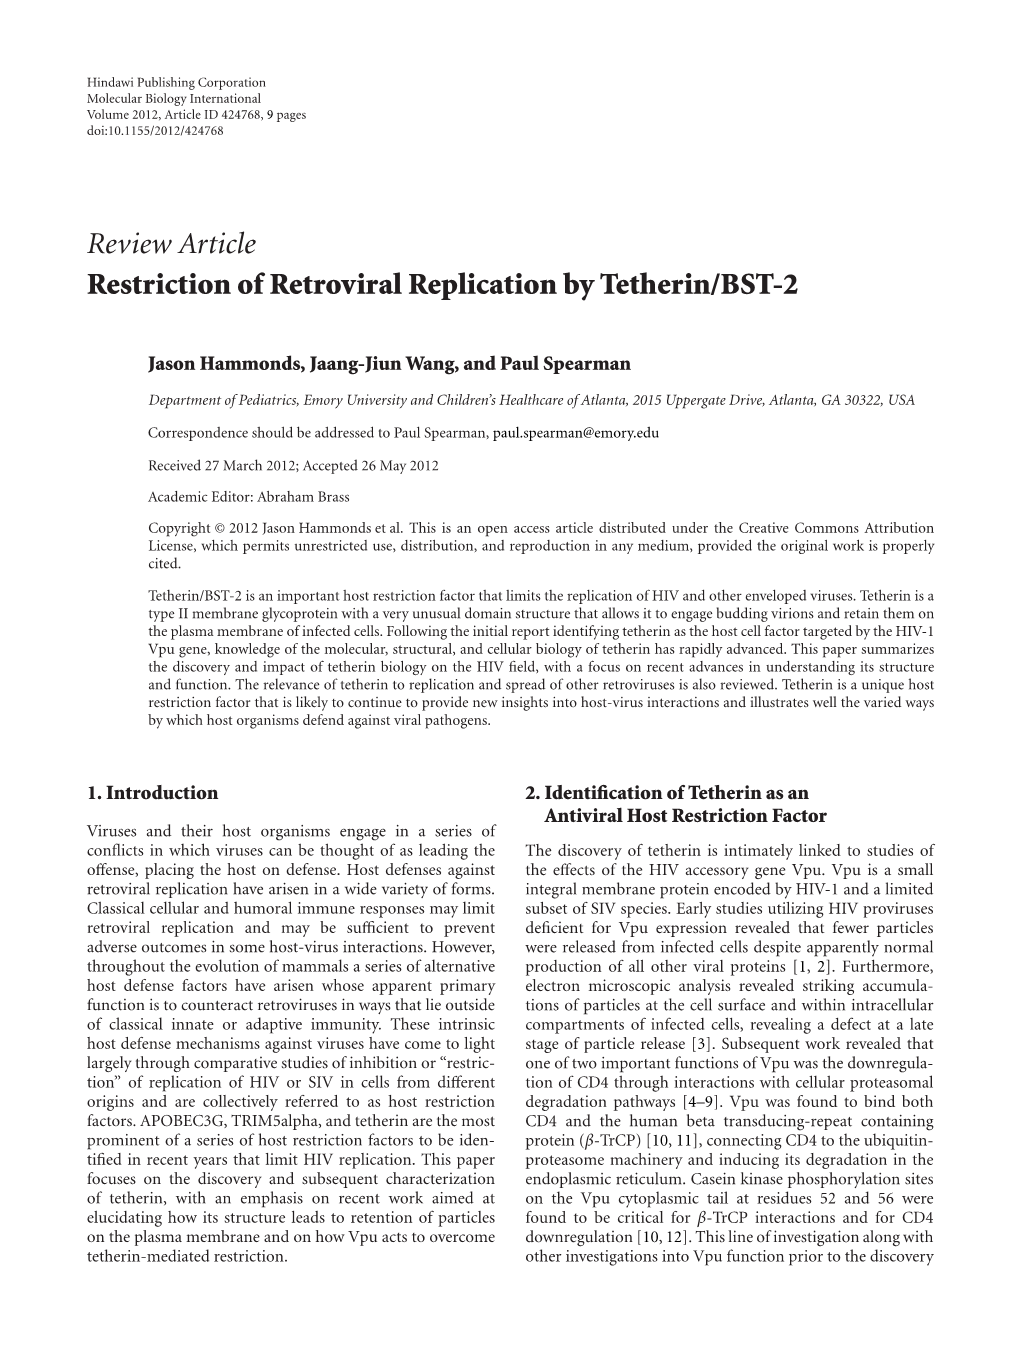 Restriction of Retroviral Replication by Tetherin/BST-2